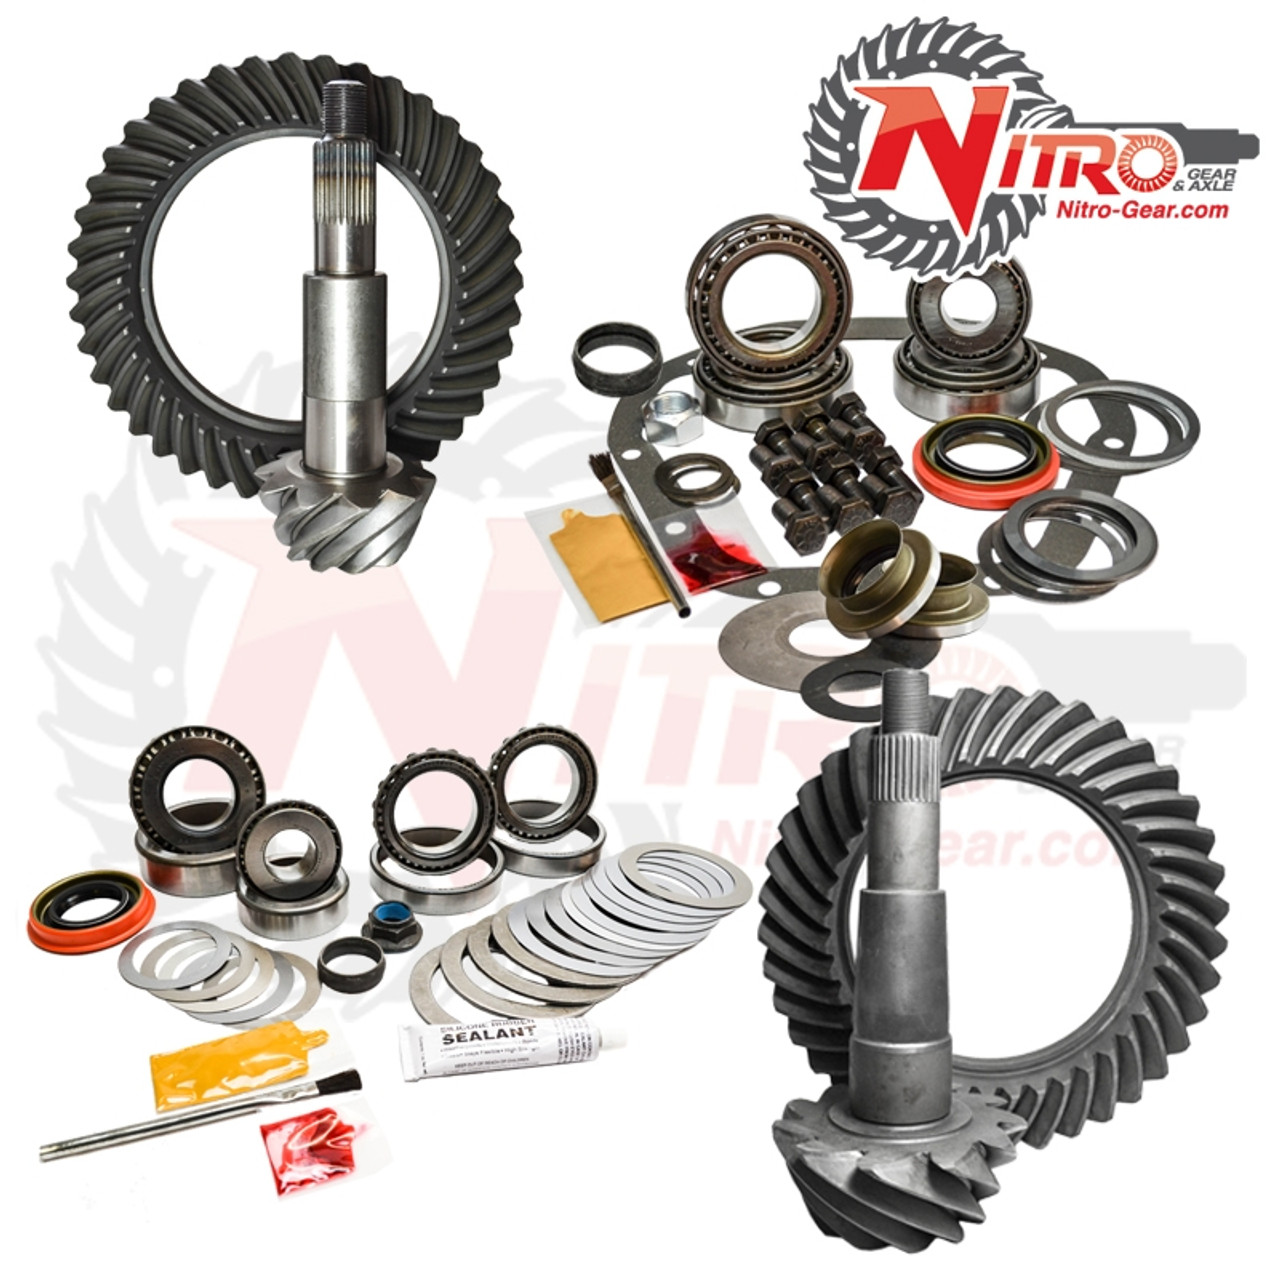 02-10 Ford F250/350 5.13 Ratio Gear Package Kit Nitro Gear and Axle